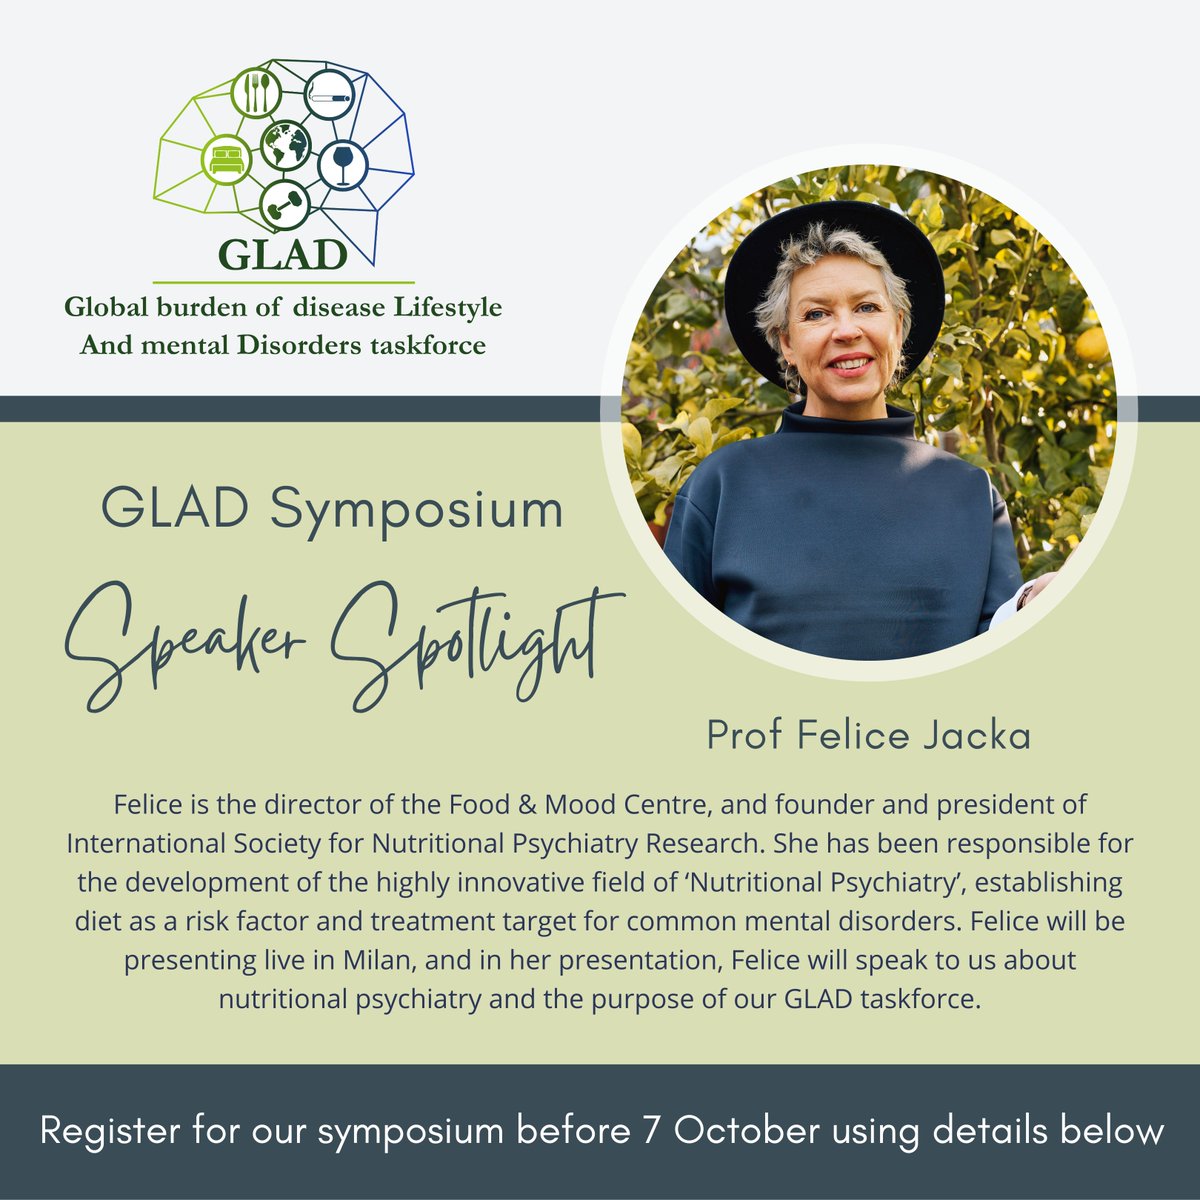 GLAD SYMPOSIUM SPEAKER SPOTLIGHT @FeliceJacka - co-director of Food & Mood Centre, founder & president of @_ISNPR. Responsible for developing the field of nutritional psychiatry, establishing diet as a risk factor for mental disorders. Register by 7 Oct foodandmoodcentre.com.au/glad-symposium…